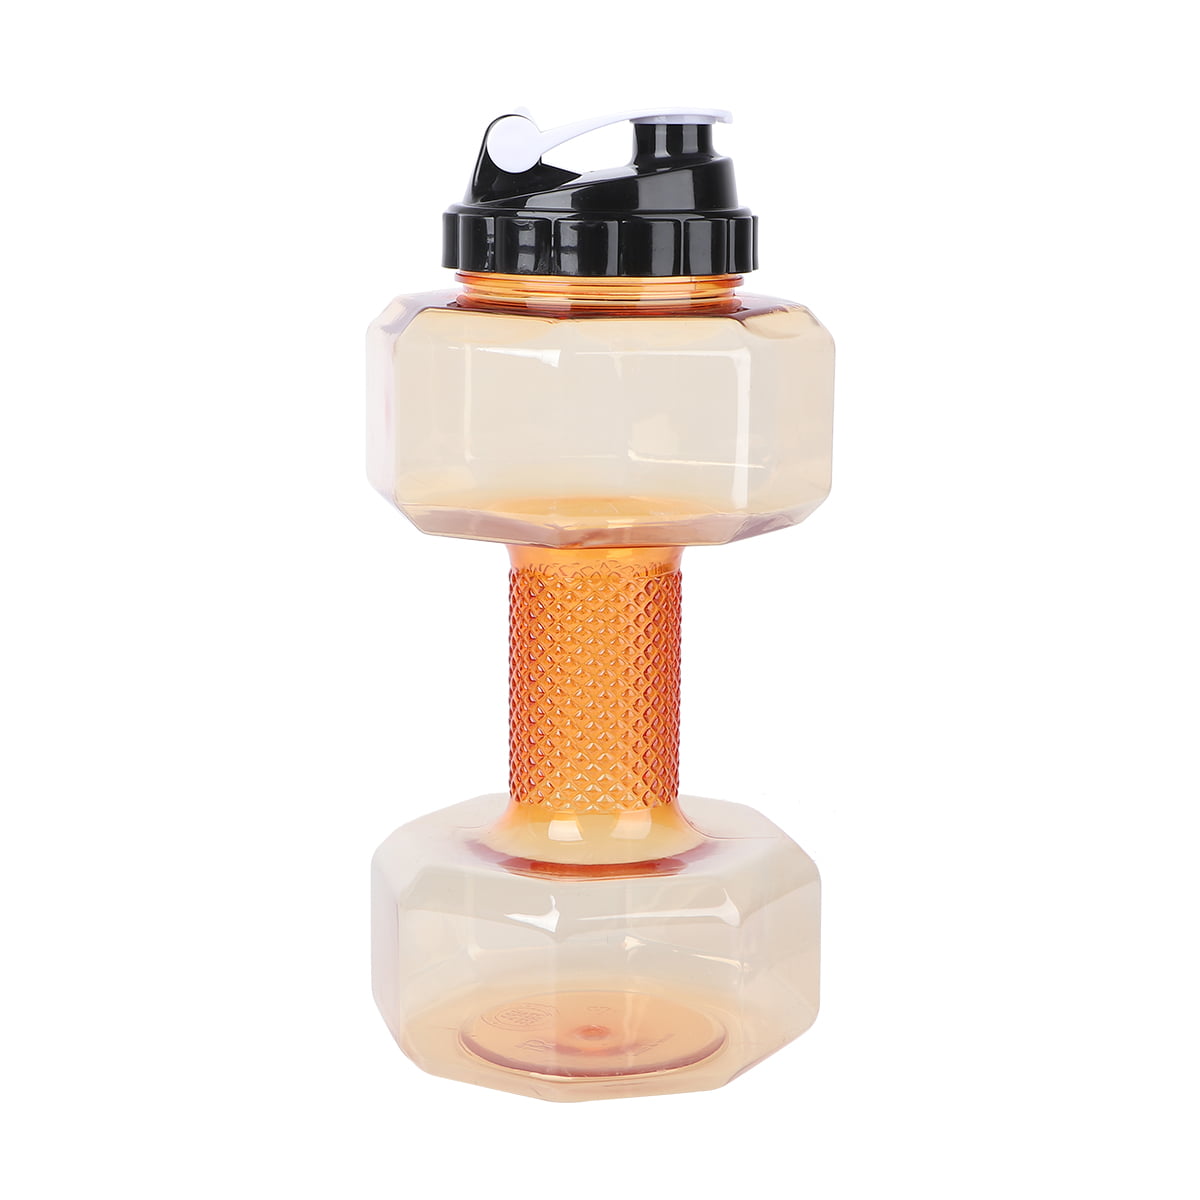 Details about   2.2L Fitness Dumbbells Water Drinks Bottle Gym Outdoor Sports Drinking Bottle 